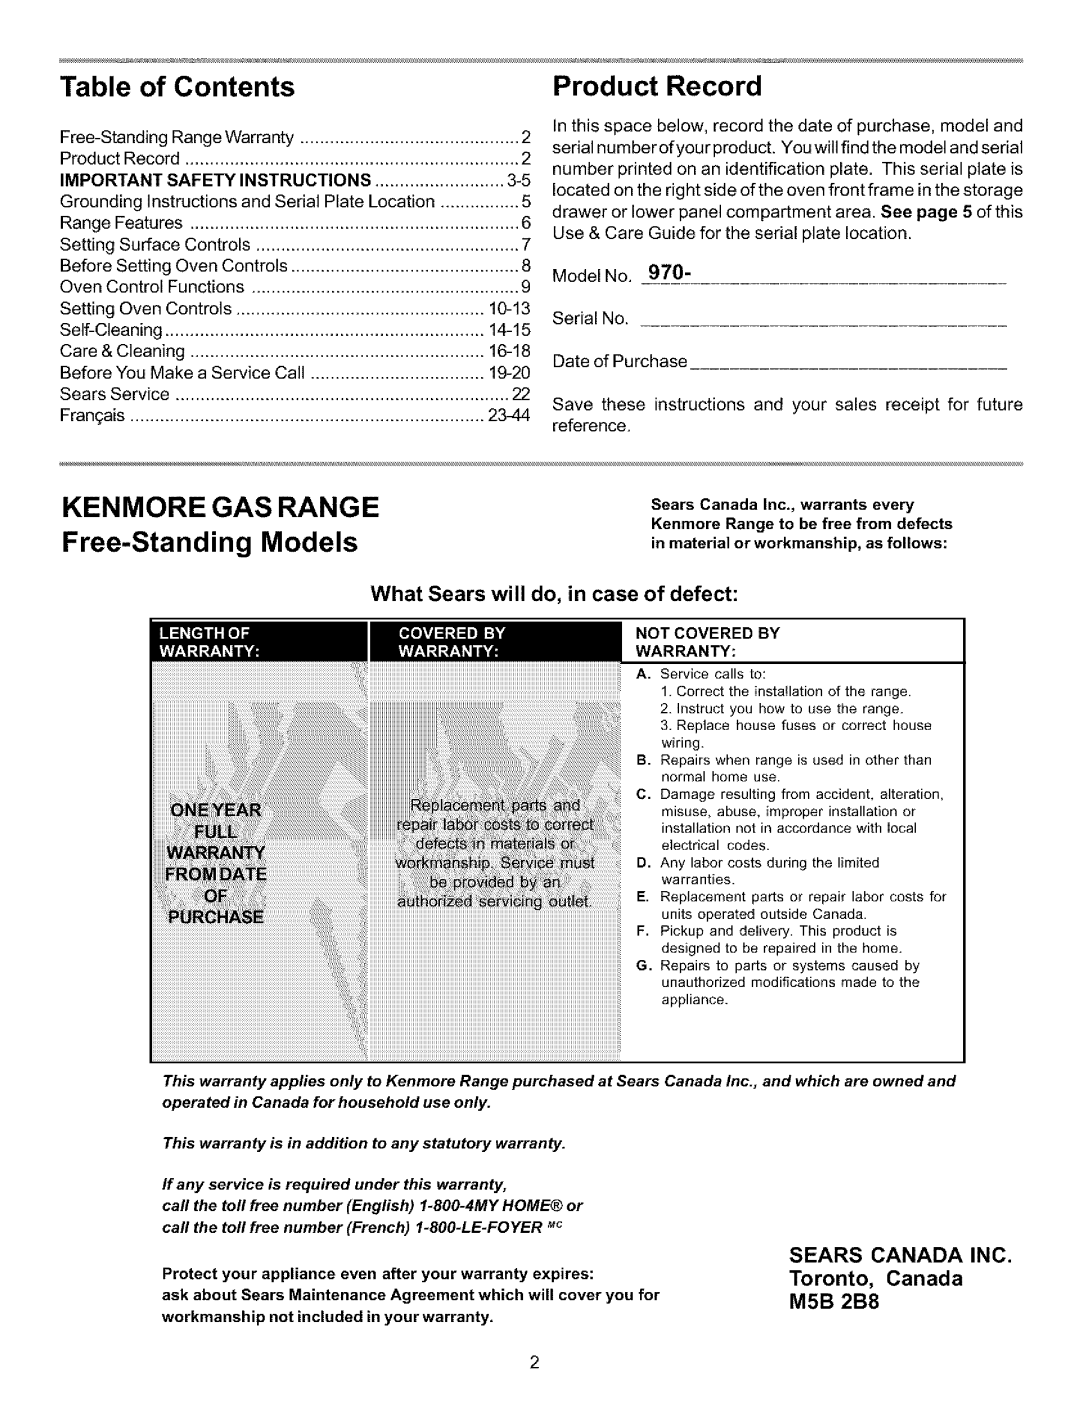 Kenmore 970-334421 manual of Contents, Product Record, KENMORE GAS RANGE Free-StandingModels, Important Safety Instructions 